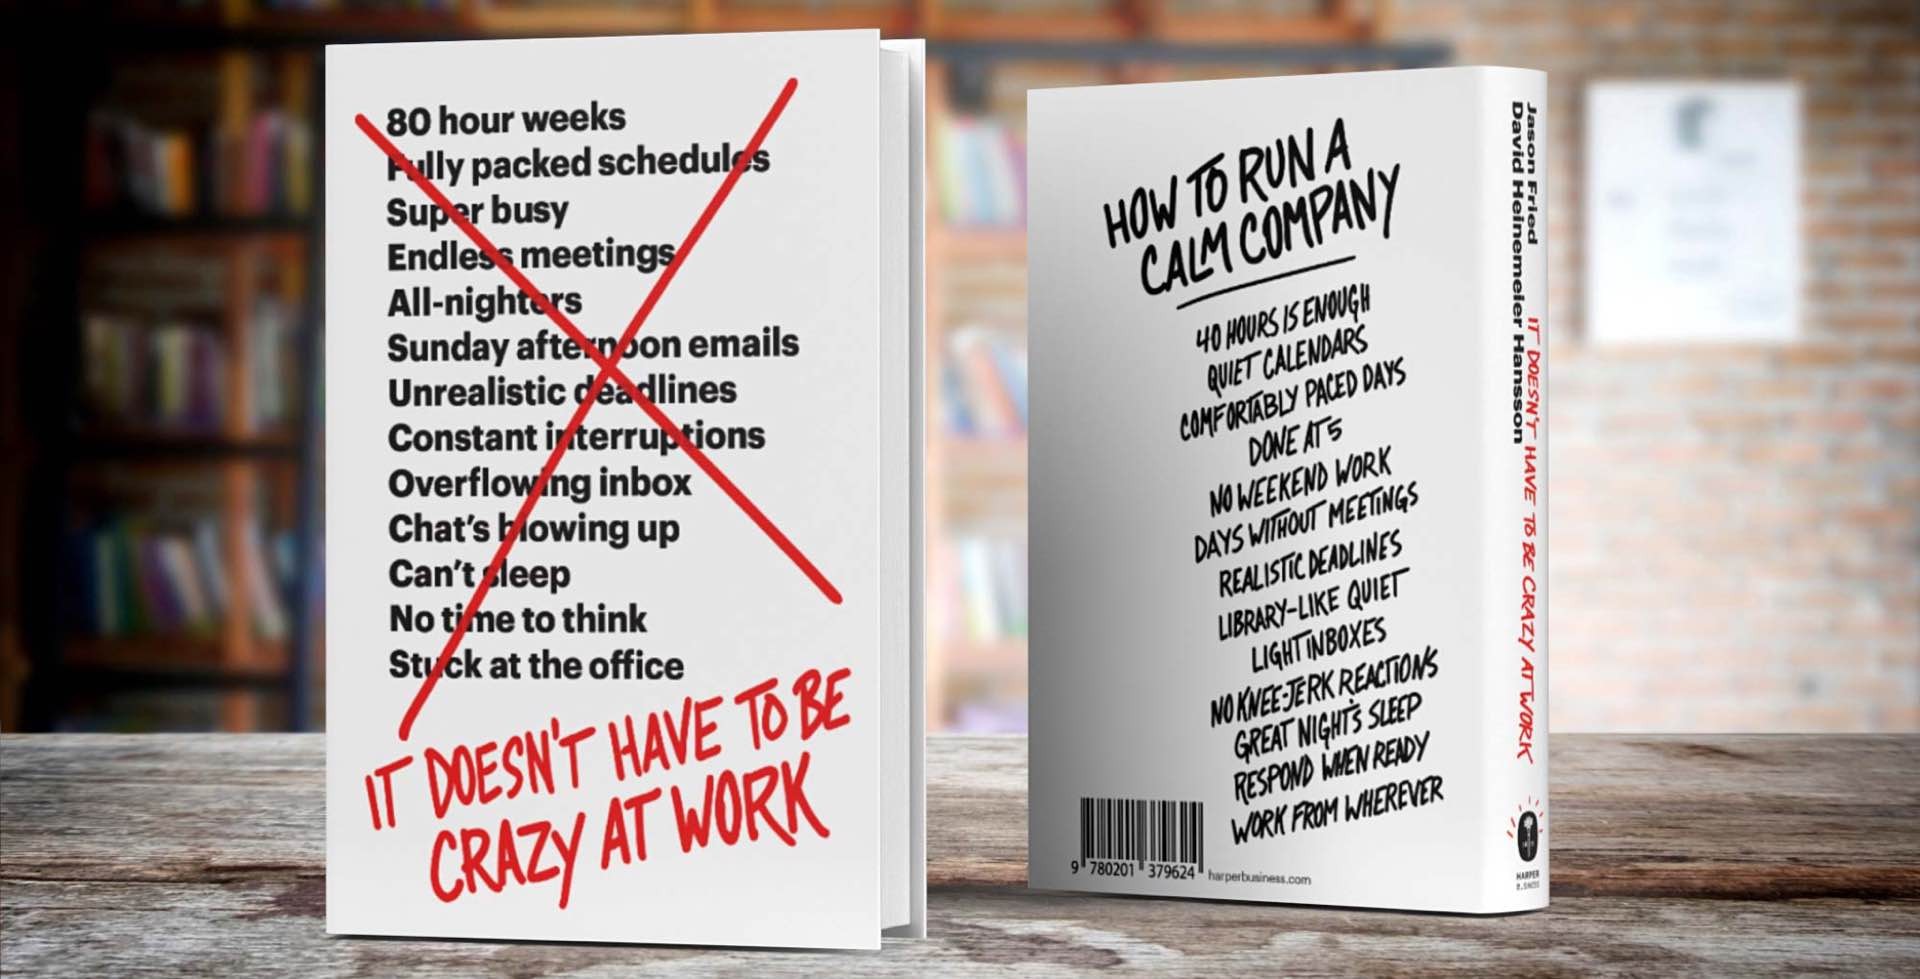 The upcoming It Doesn't Have to Be Crazy at Work by Jason Fried & David Heinemeier Hansson.